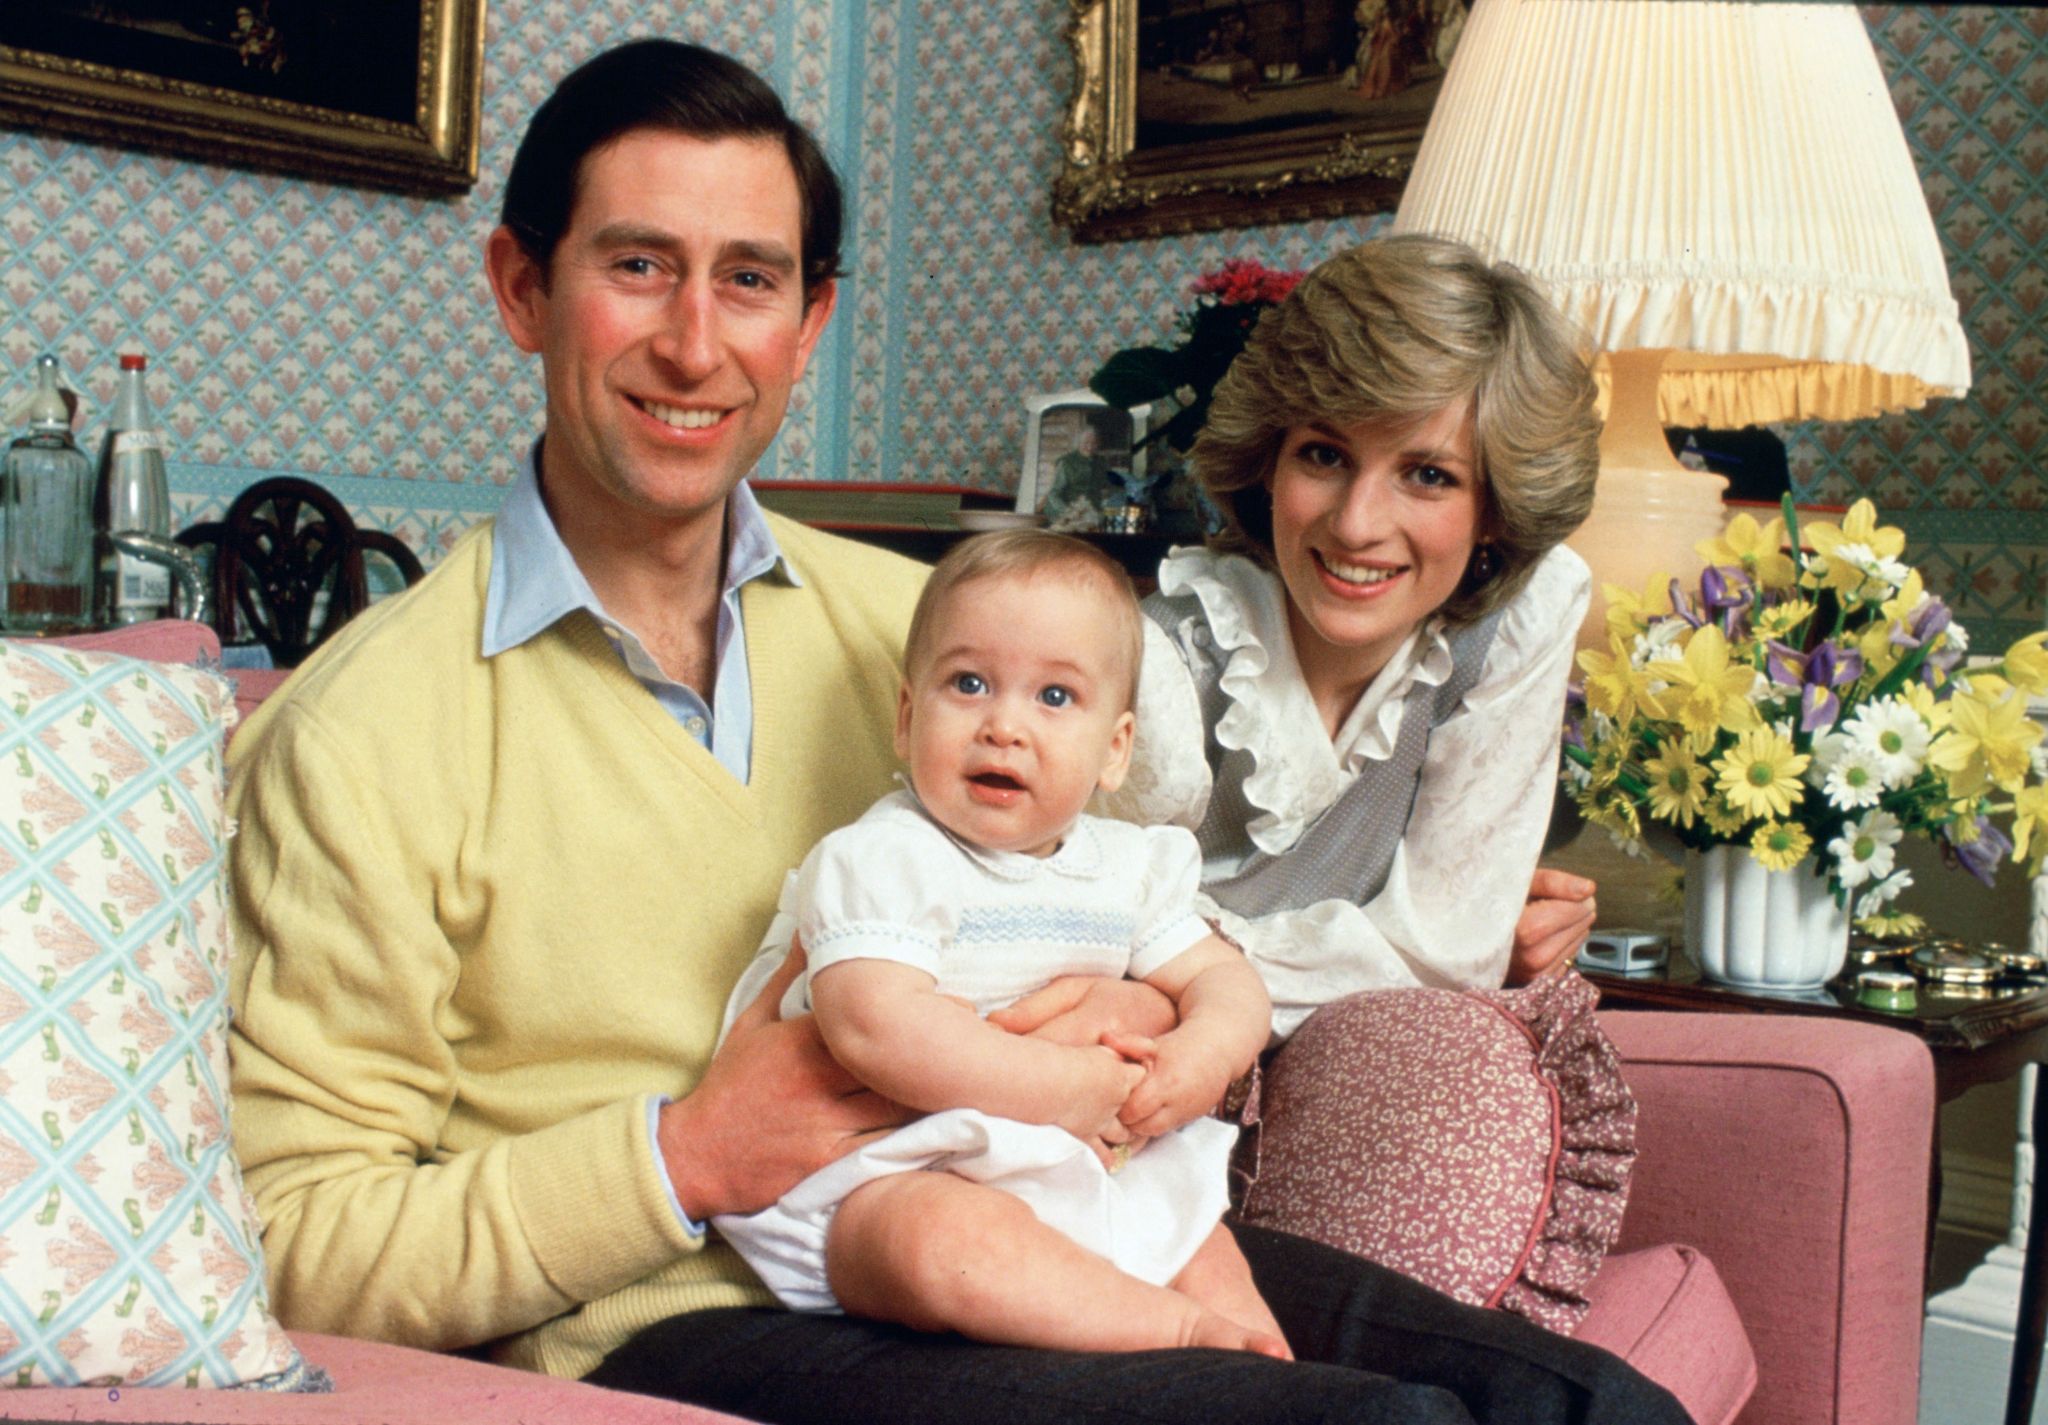 People are just now noticing that Princess Diana and Prince Charles